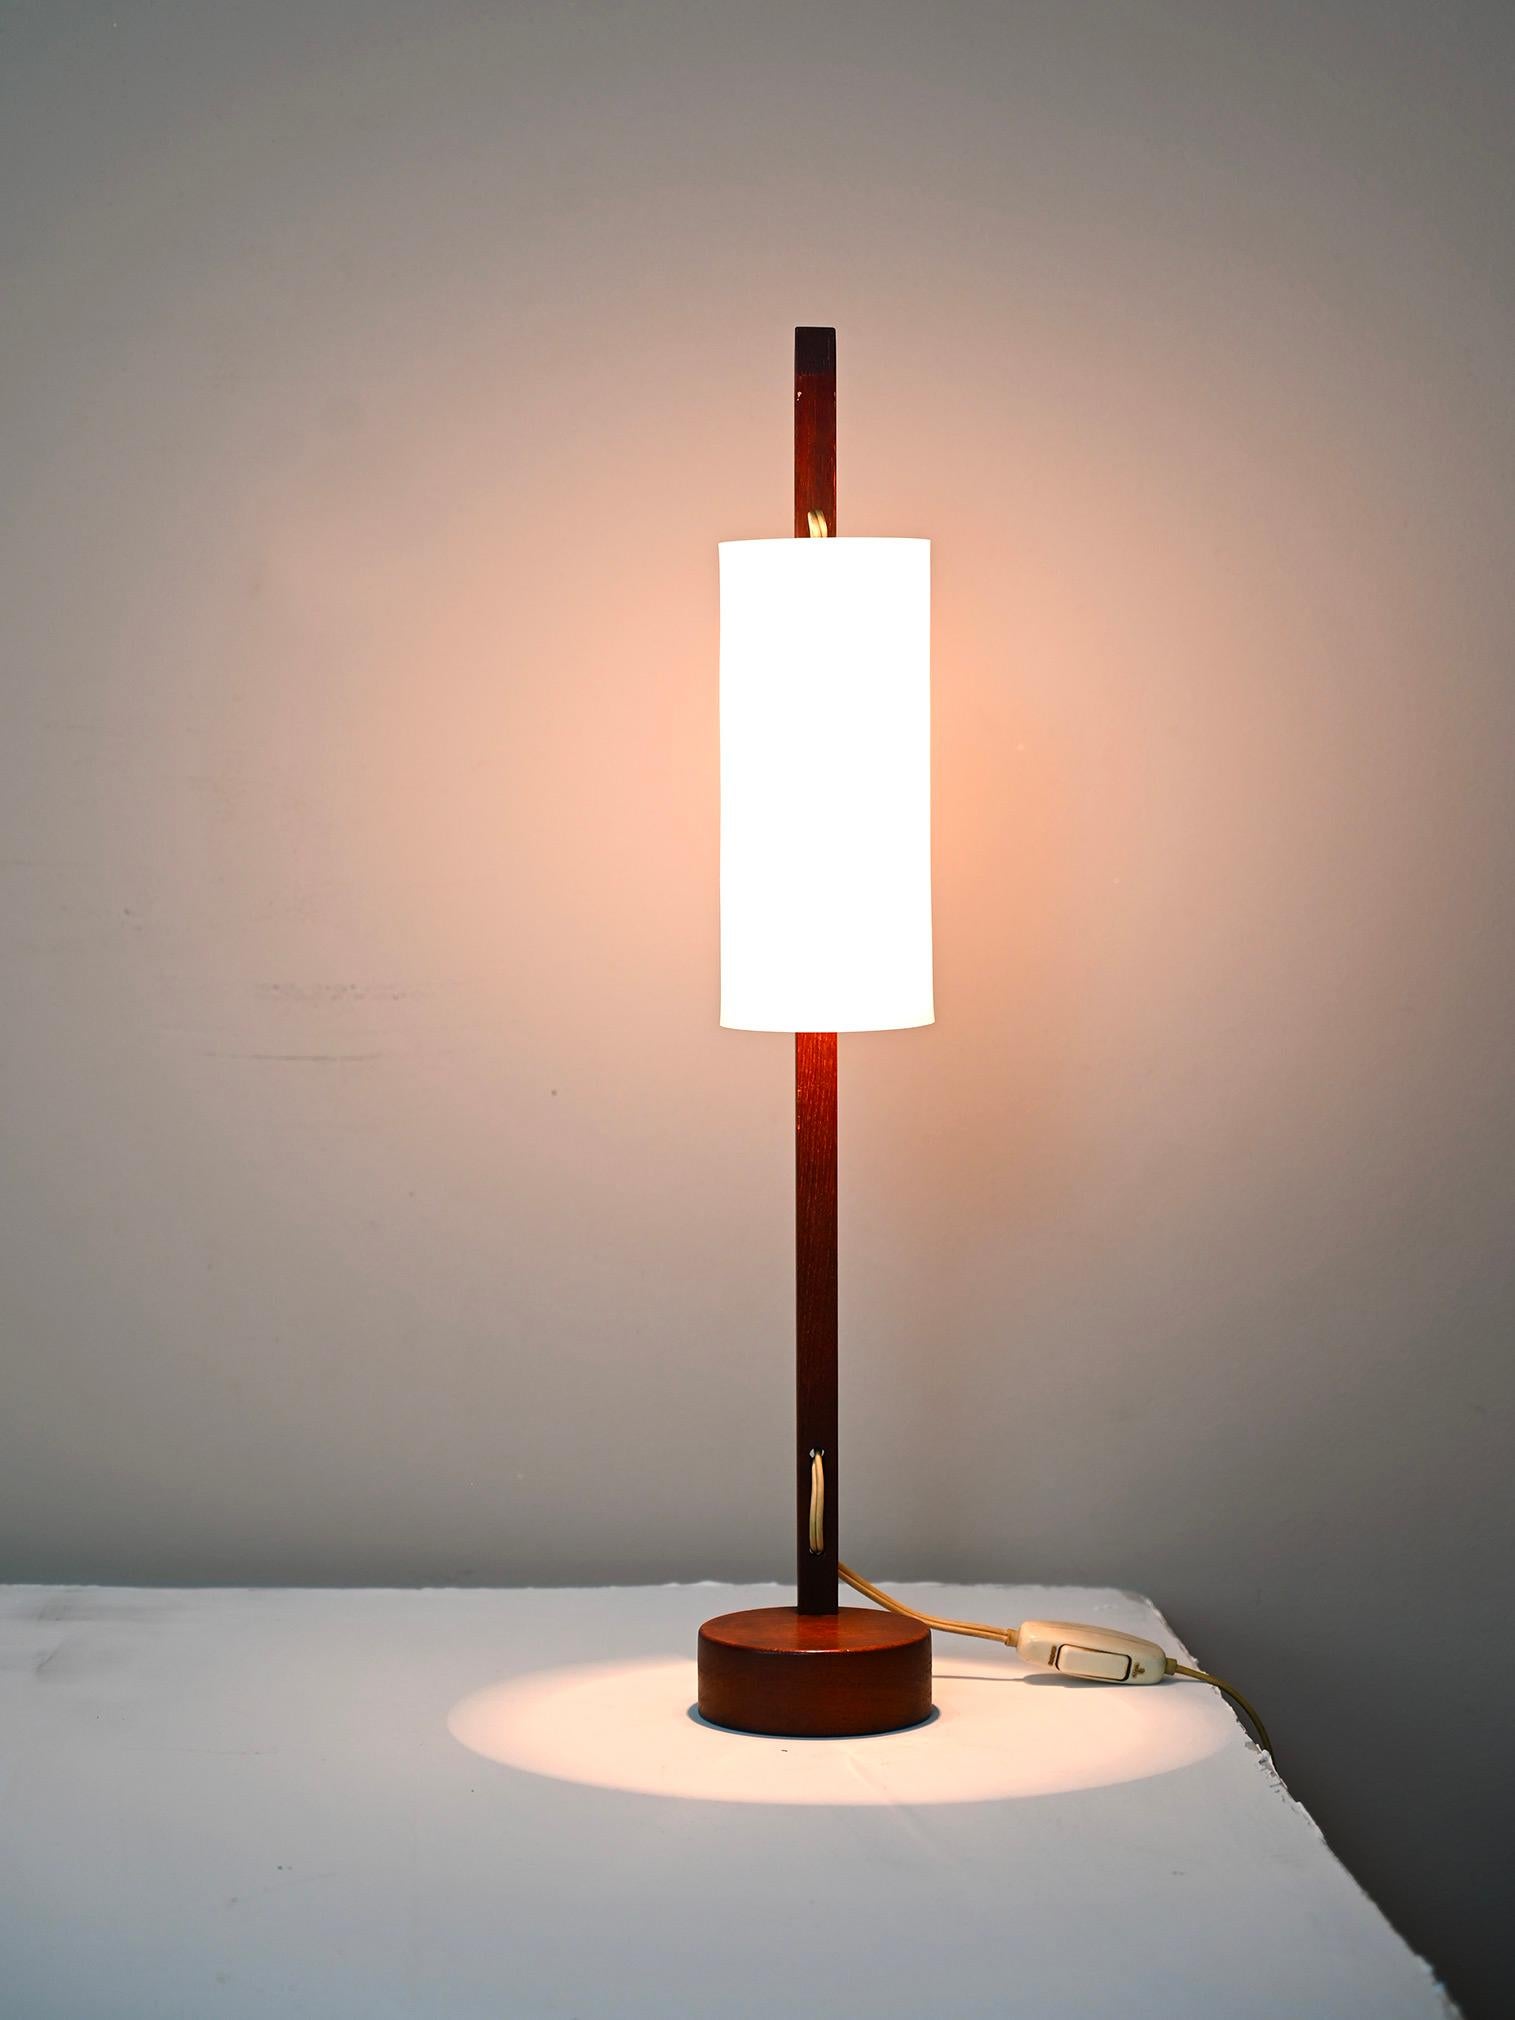 Original table lamp by Hans Agne Jakobsson for Markaryd.
The lamp is made of teak wood while the shade is made of bakelite.
The lamp has the originality sticker and was produced in Sweden between the 1950s and 1960s.

Very good condition - the lamp